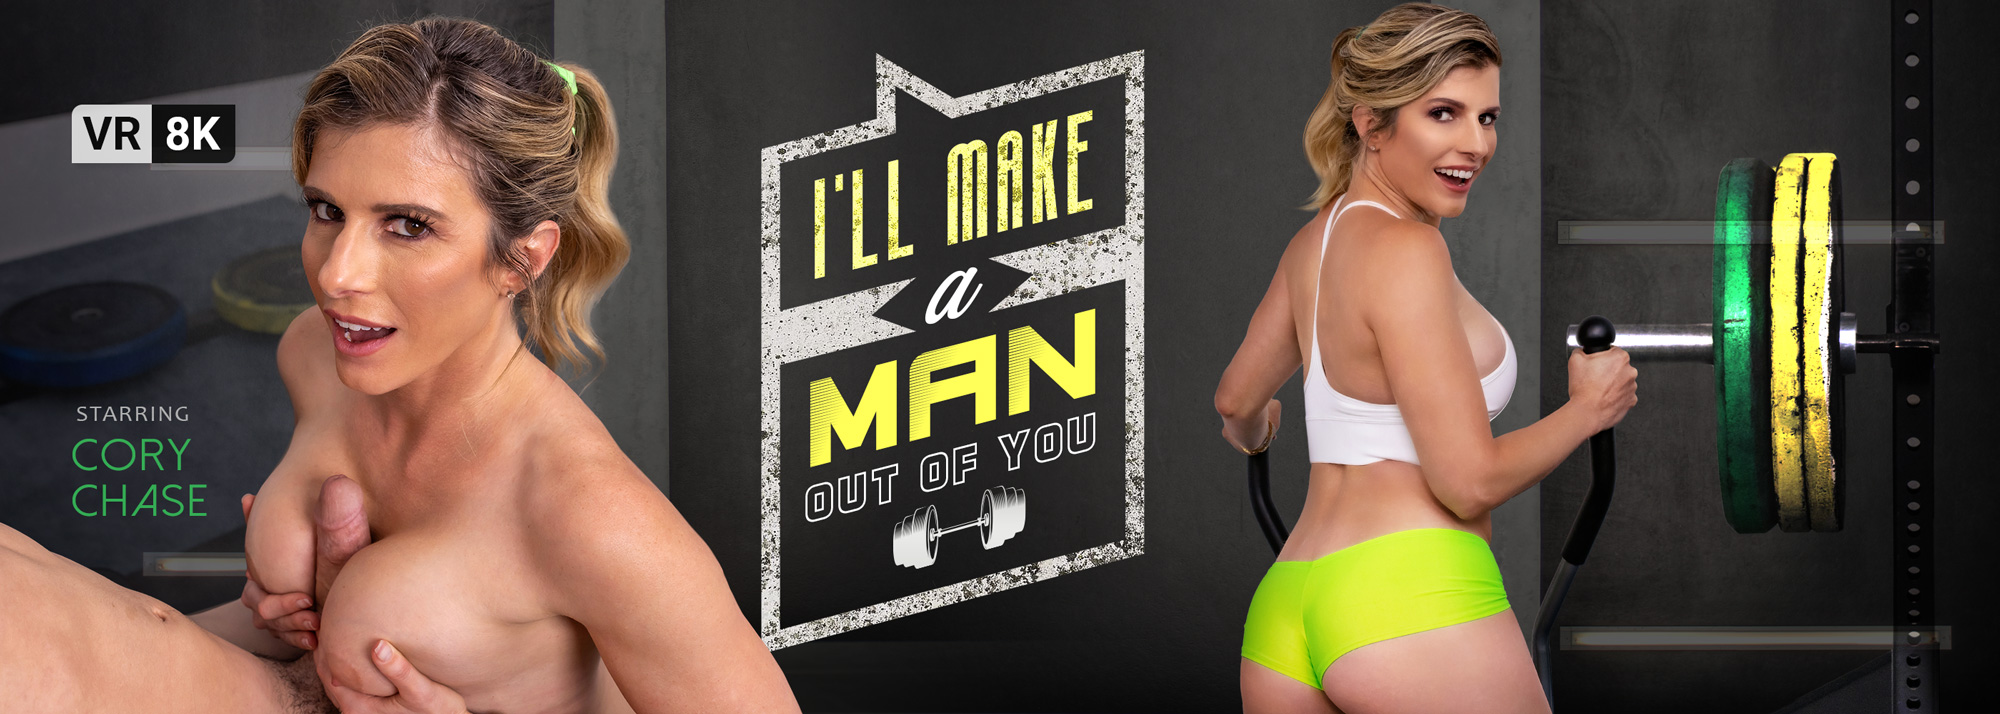 I'll Make a Man Out of You - VR Porn Video, Starring: Cory Chase